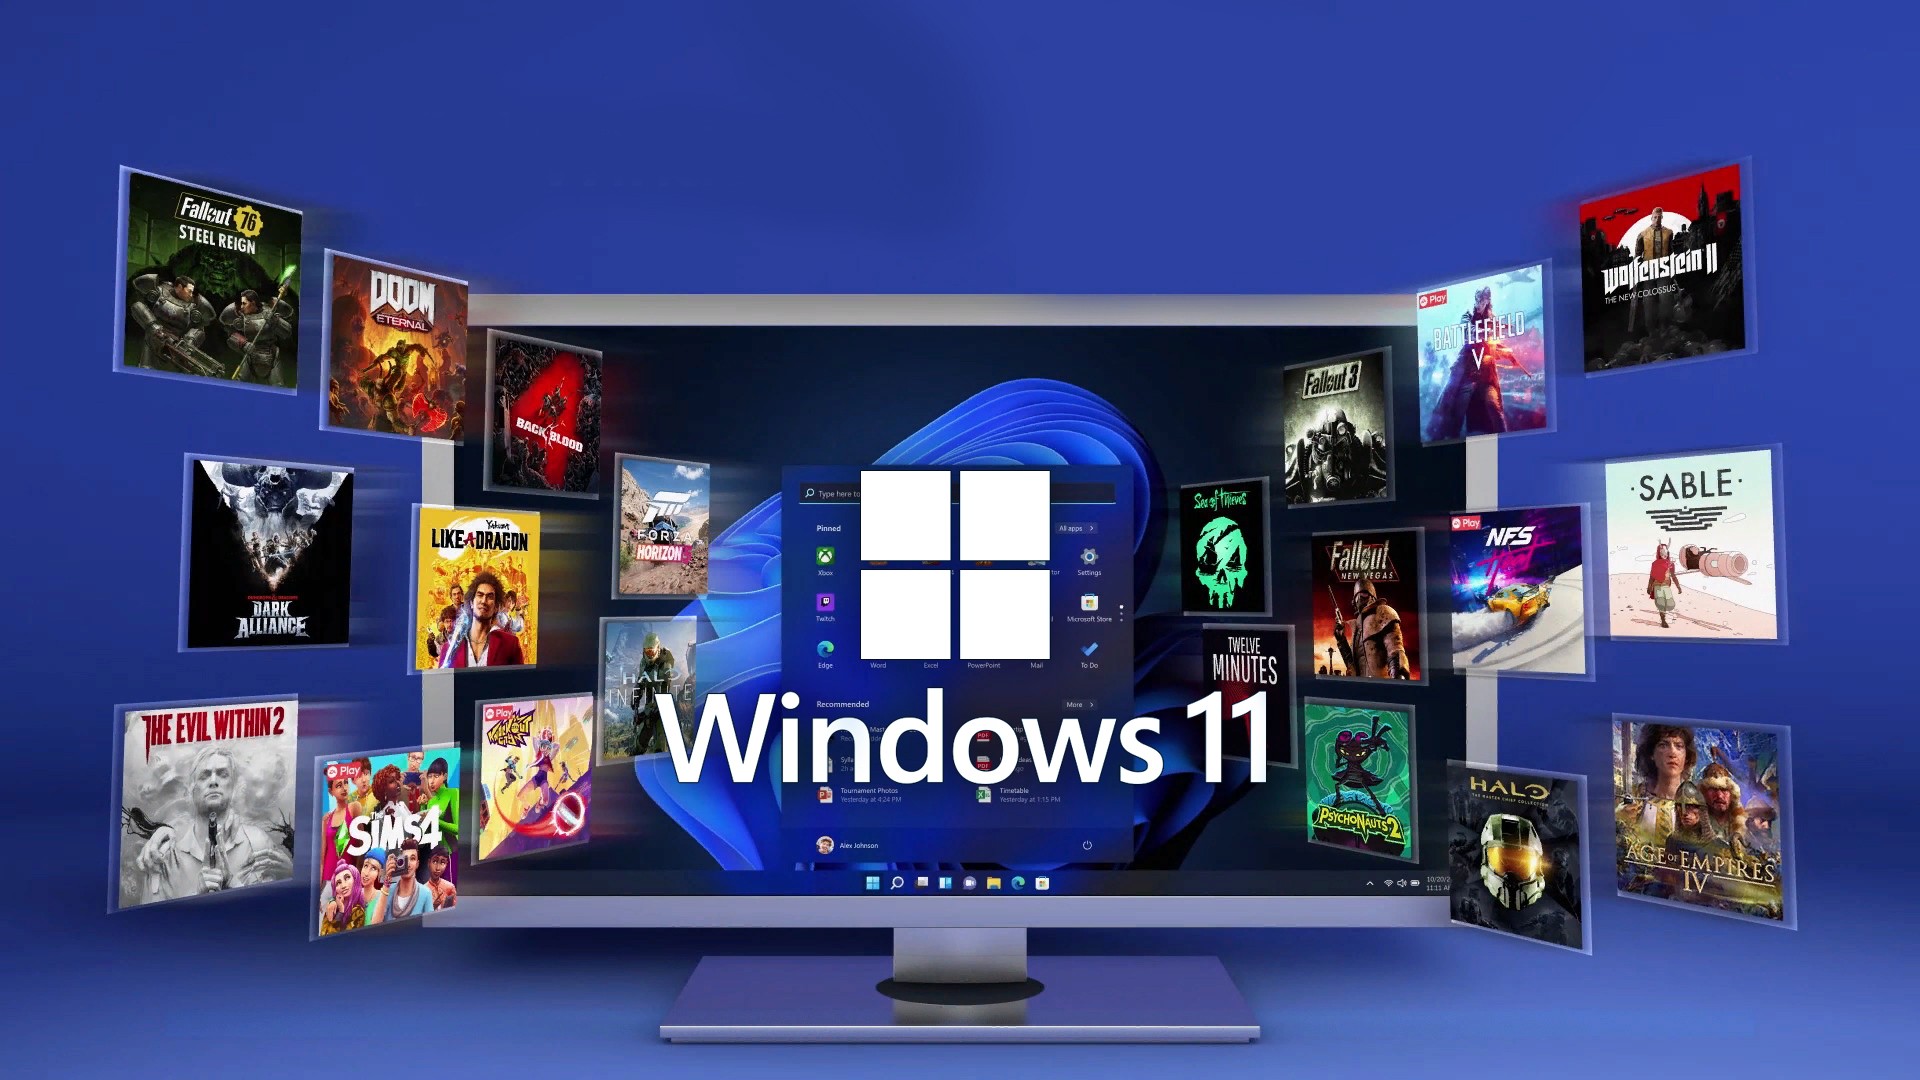 Steam: Windows 11 is slowly growing in number of users, but most of them are still using Windows 10